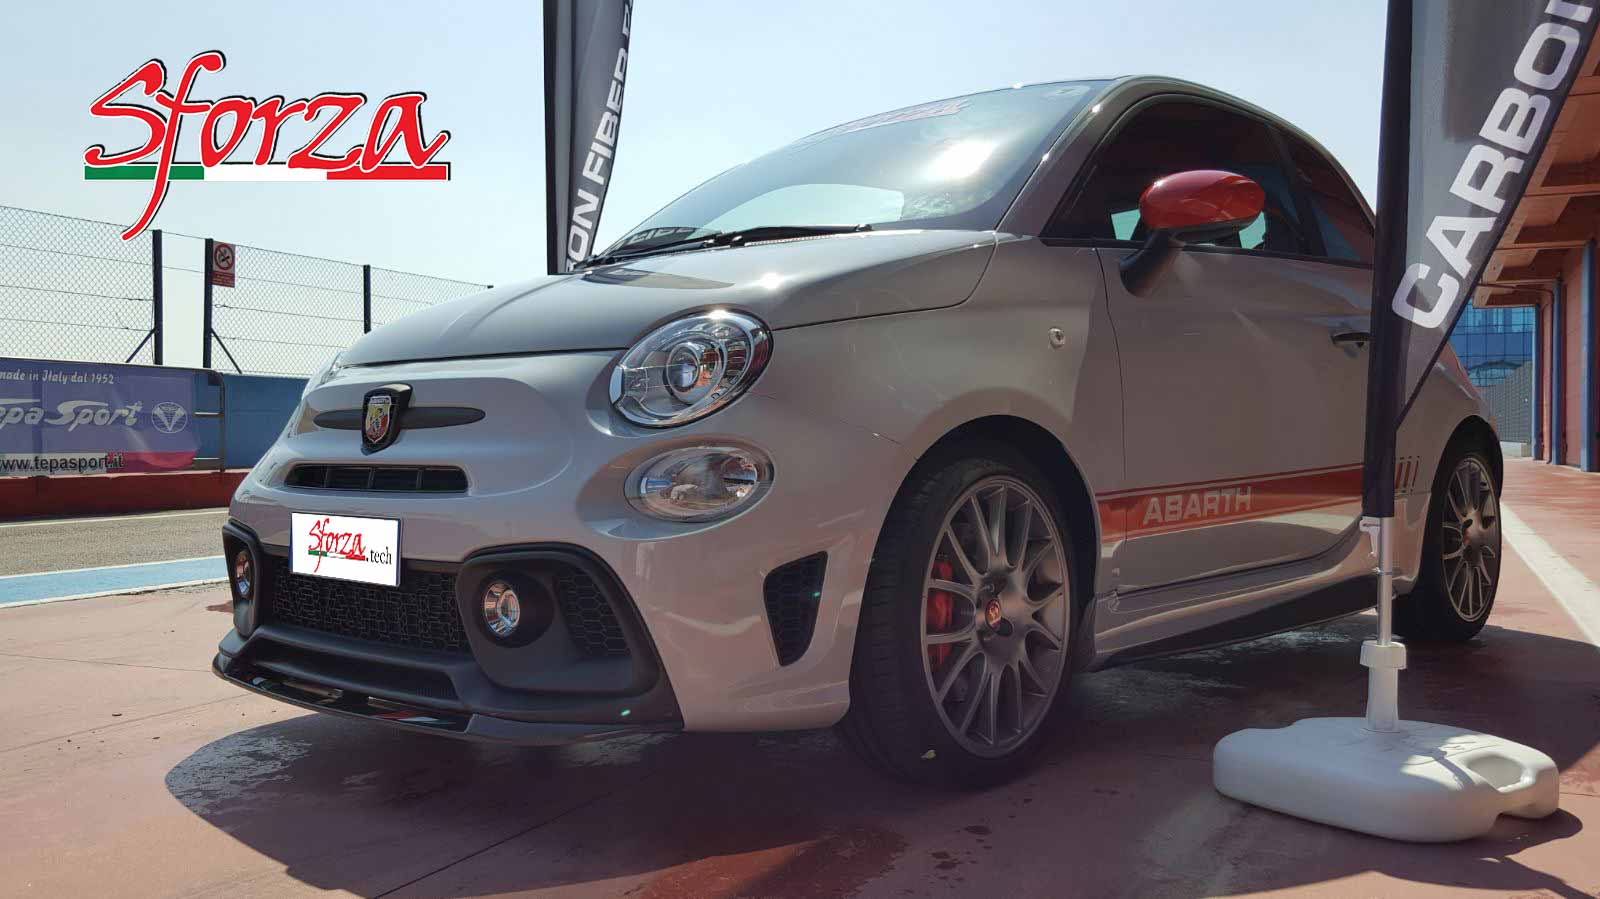 Only Abarth and Show Sforza 595 pit lane